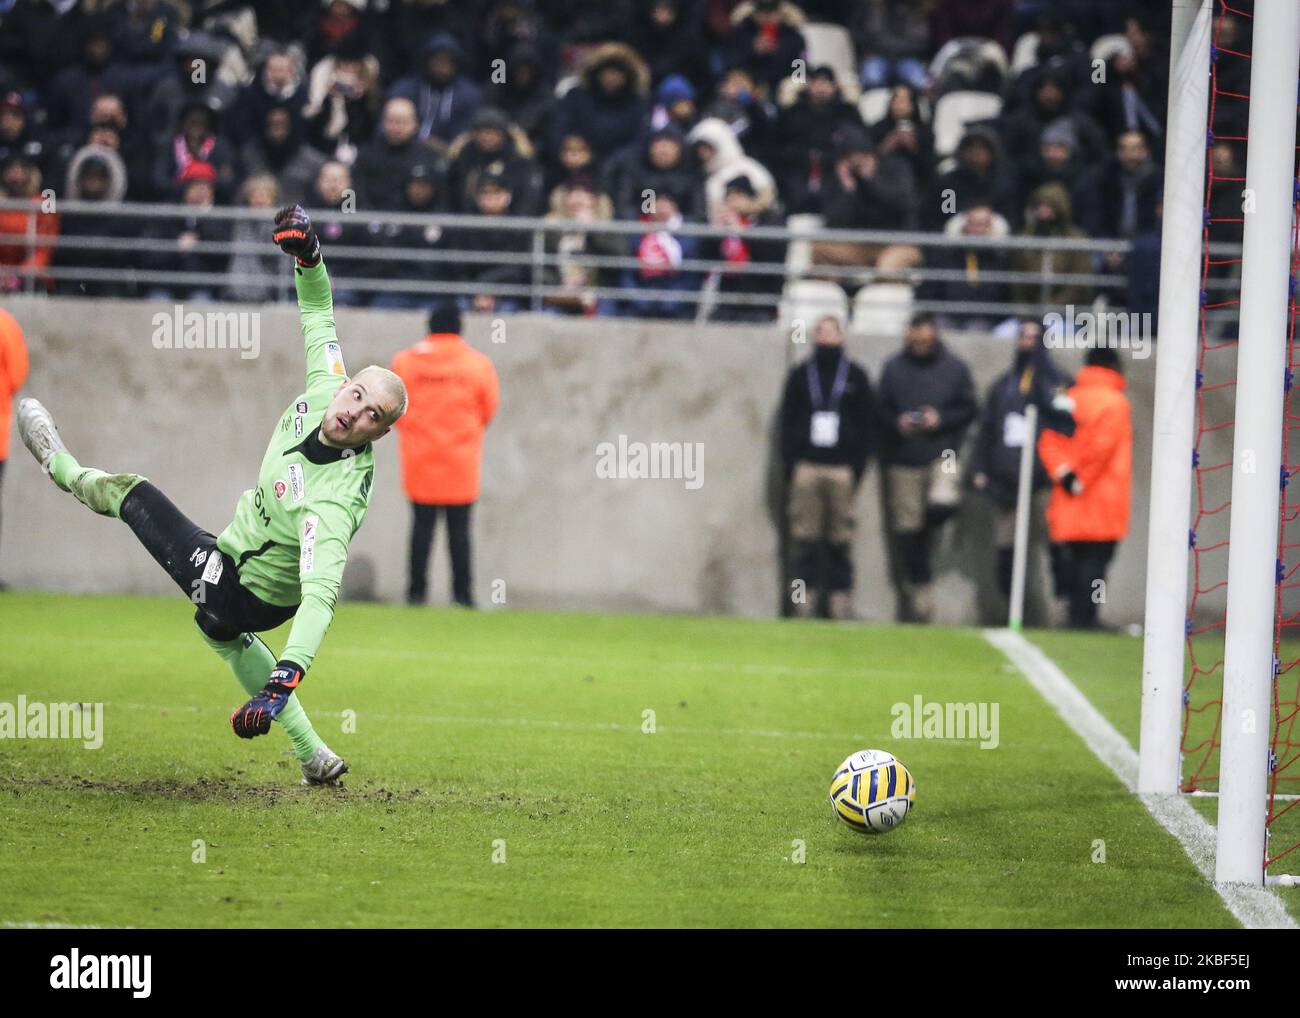 Rajkovic Predrag during the French League Cup semi-final football match between Stade de Reims and Paris Saint-Germain at the Auguste Delaune Stadium in Reims on January 22, 2020. (Photo by Elyxandro Cegarra/NurPhoto) Stock Photo